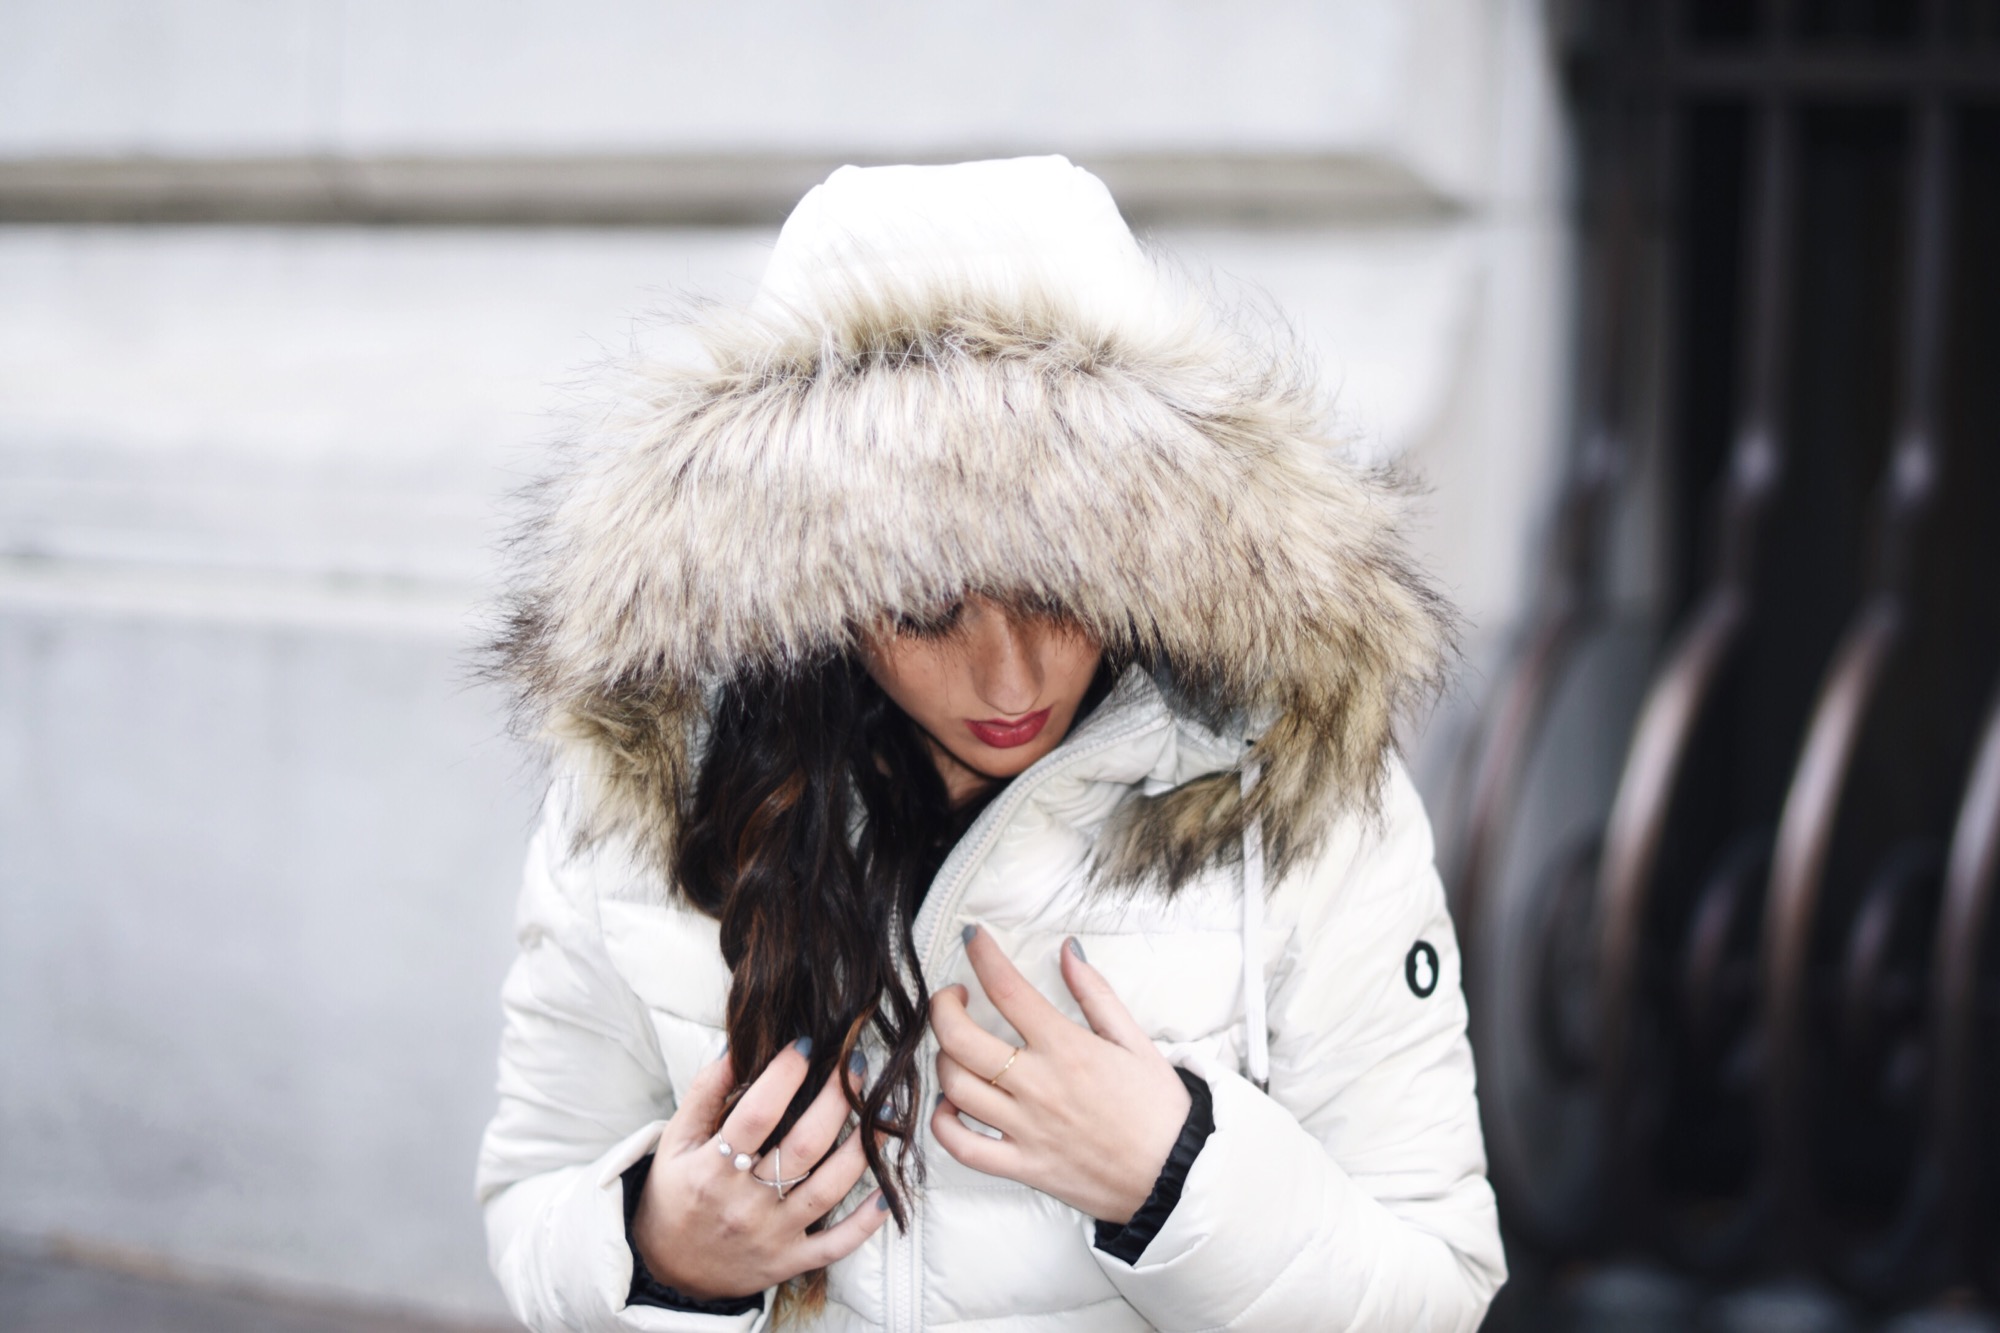 White Hi-Low Puffer Coat Snowman New York Louboutins & Love Fashion Blog Esther Santer NYC Street Style Blogger Puffer Premium Down Jacket Outerwear Company Collab Faux-Fur Hood White Winter Look Beautiful Warm Model Photoshoot Shopping Discount Code.JPG